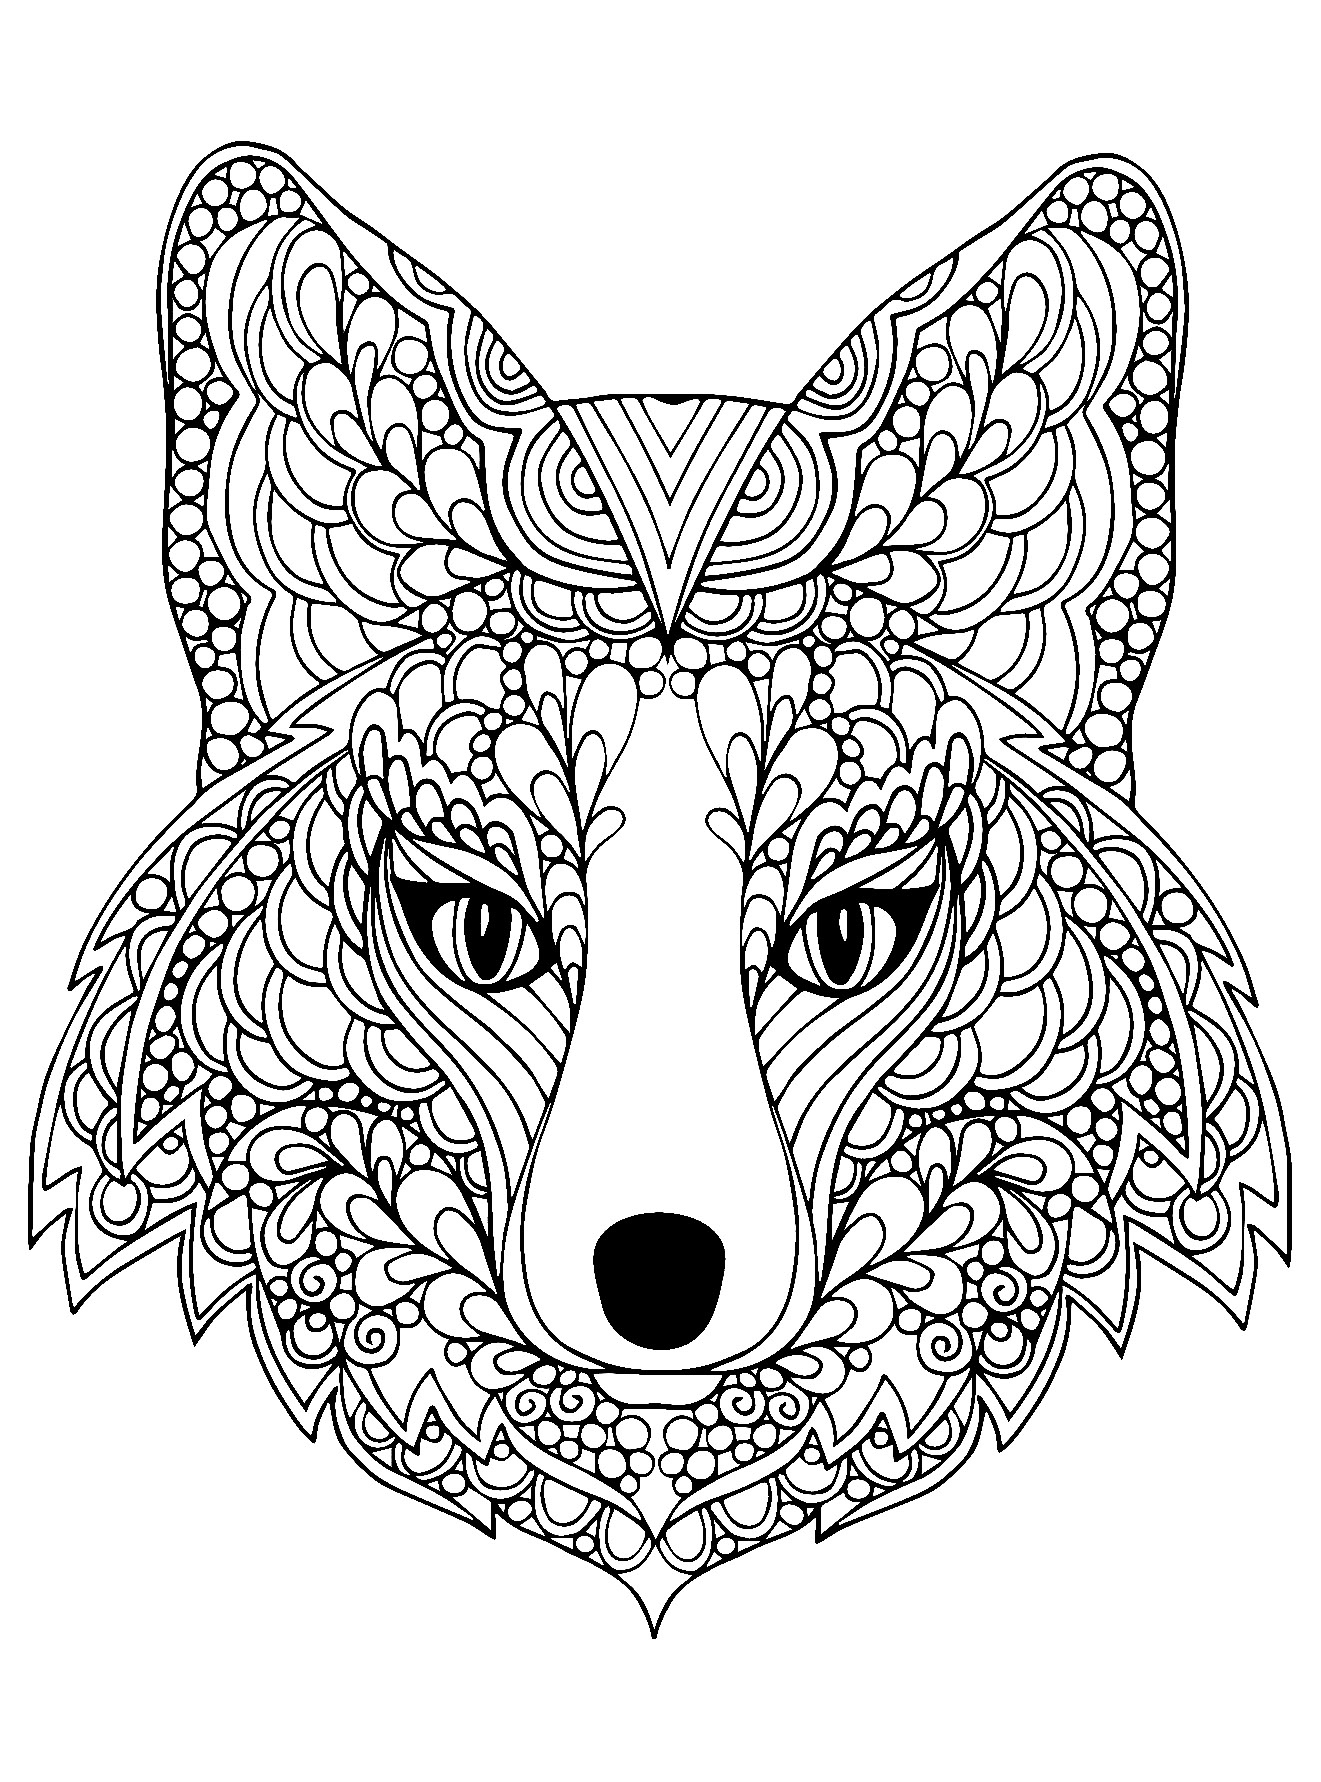 Coloring Pages : Printable Animal Coloring Pages Free Wild Sheets - Free Printable Animal Coloring Pages